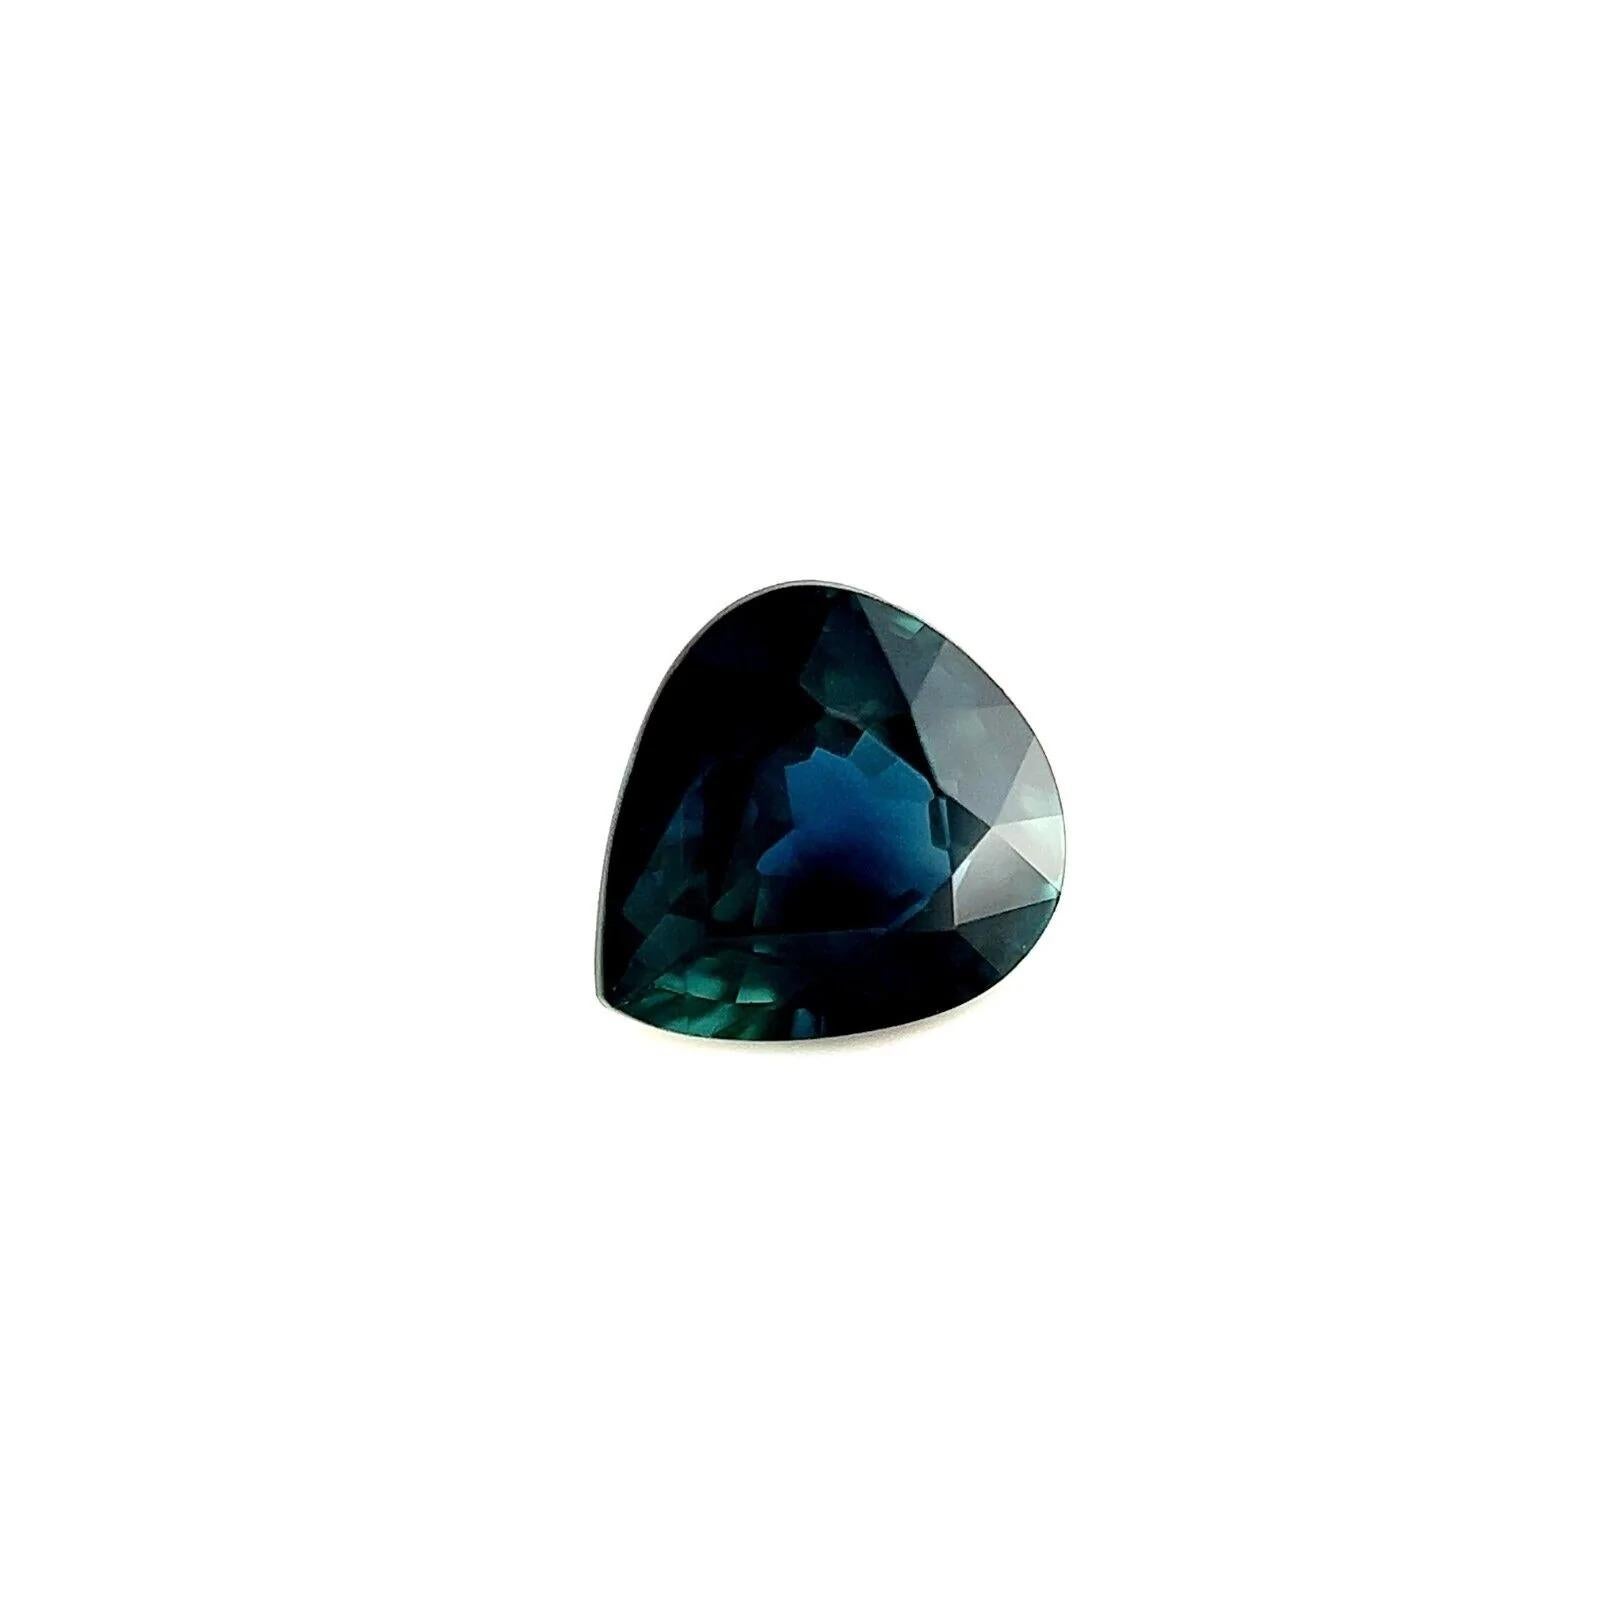 Fine Australian Deep Teal Blue Sapphire 0.96ct Pear Teardrop Cut Rare 6x5.7mm

Fine Deep Teal Blue Sapphire Gemstone.
0.96 Carat with a beautiful deep blue colour and excellent clarity, a very clean stone. Also has an excellent pear teardrop cut and